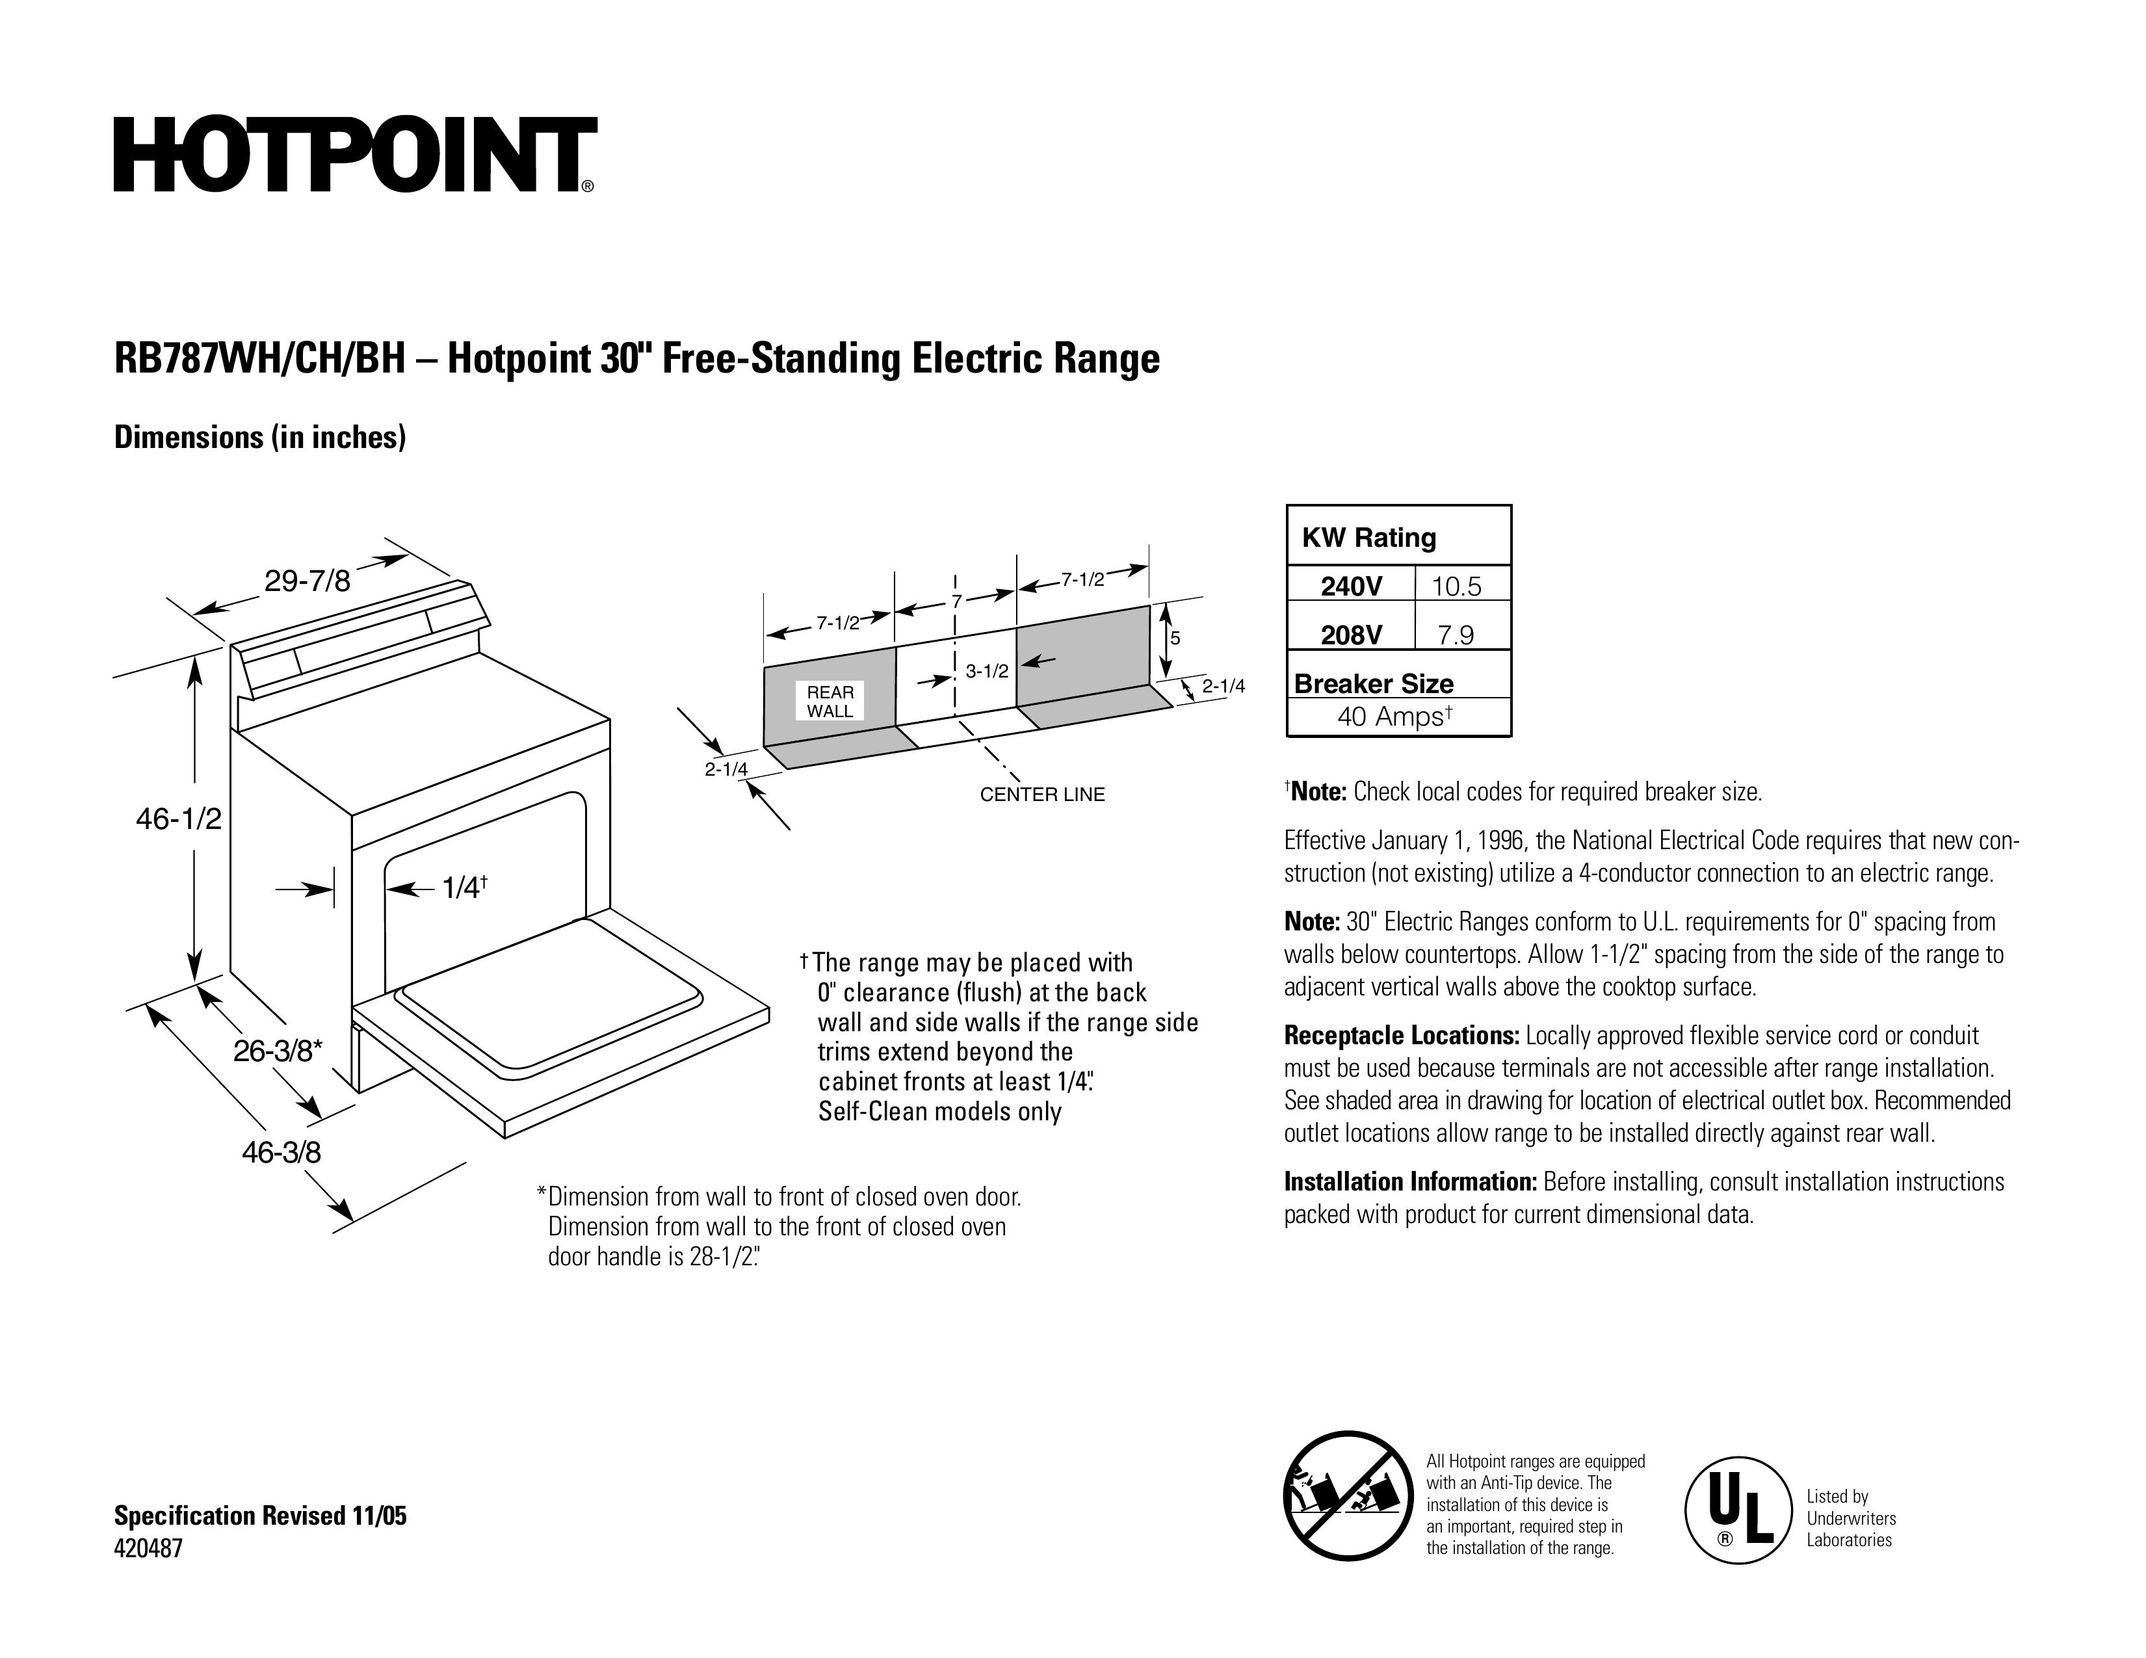 Hotpoint RB787WH/CH/BH Car Stereo System User Manual